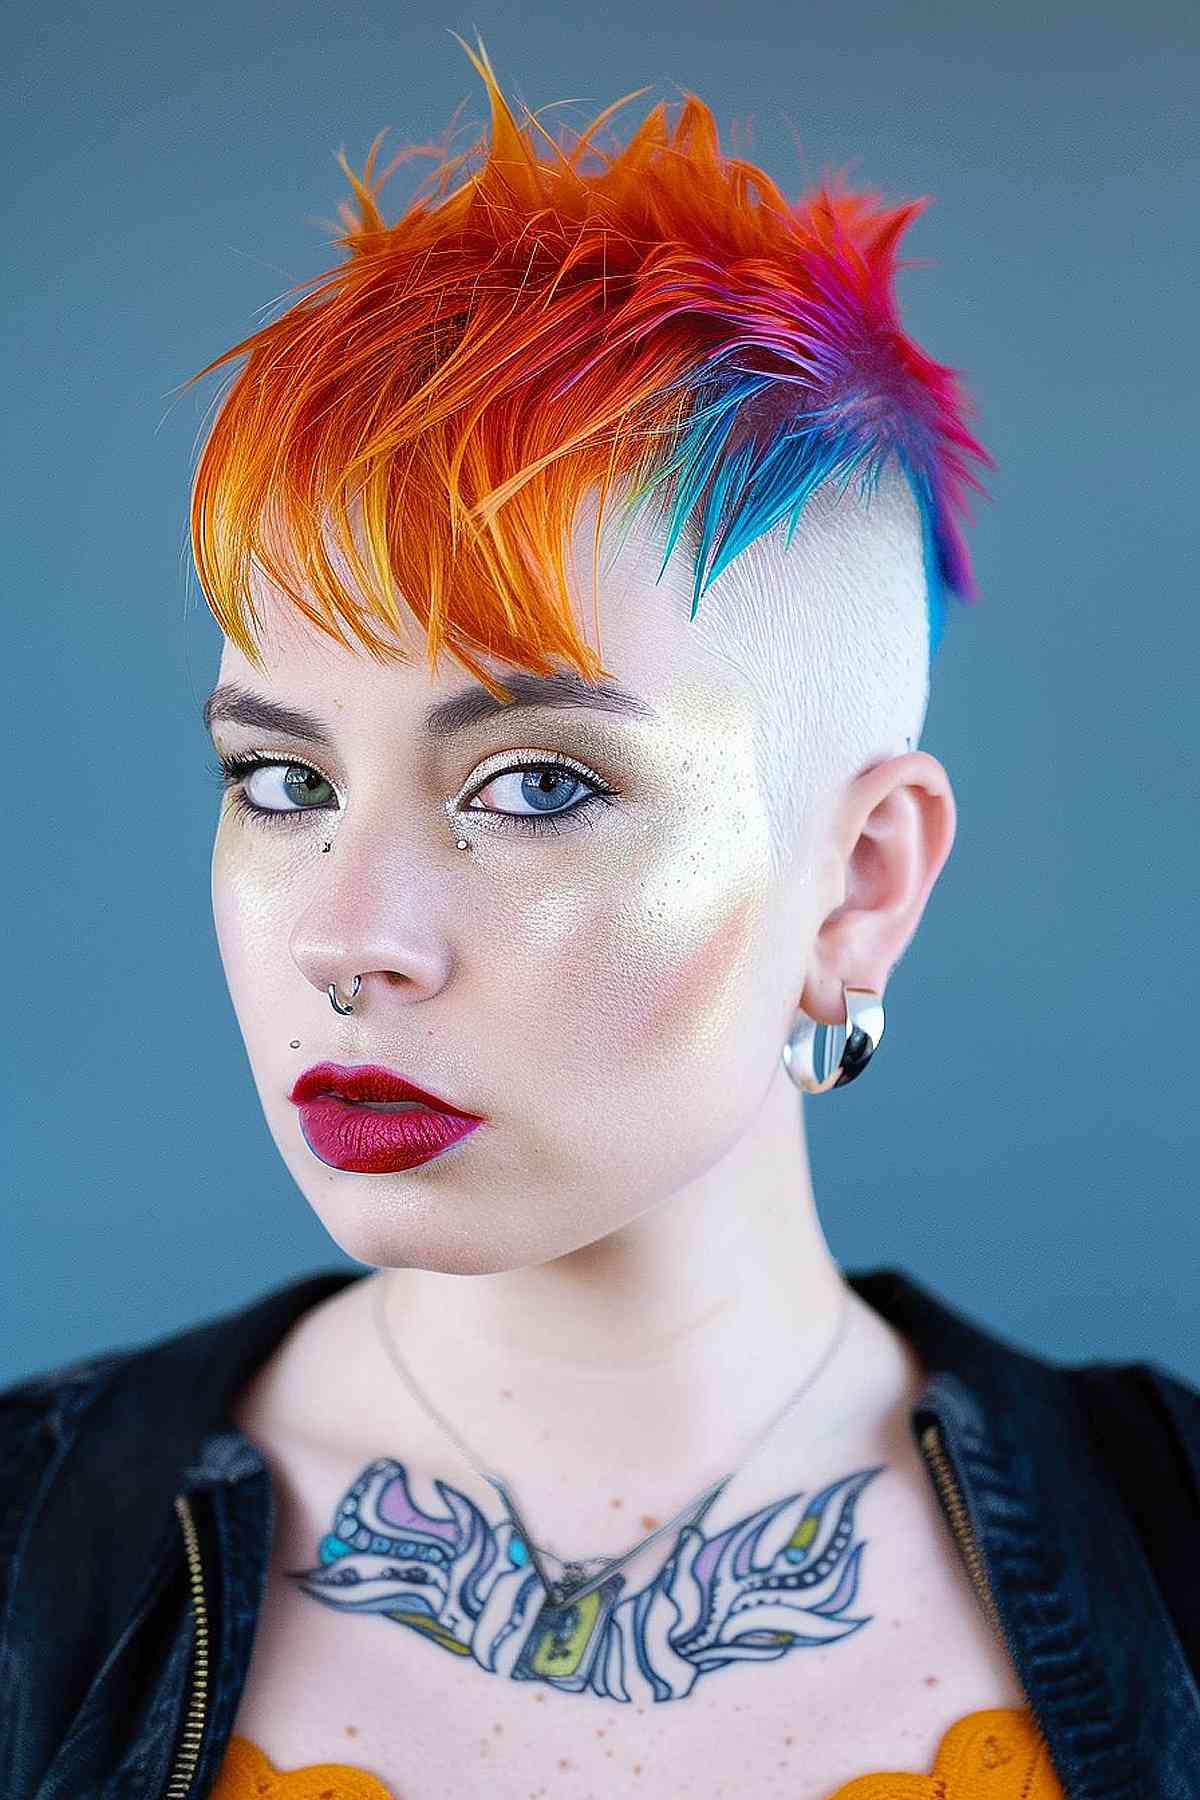 Punk pixie cut with a vivid color gradient from orange and red at the top to blue at the tips, styled to flatter round face shapes and offer low maintenance.